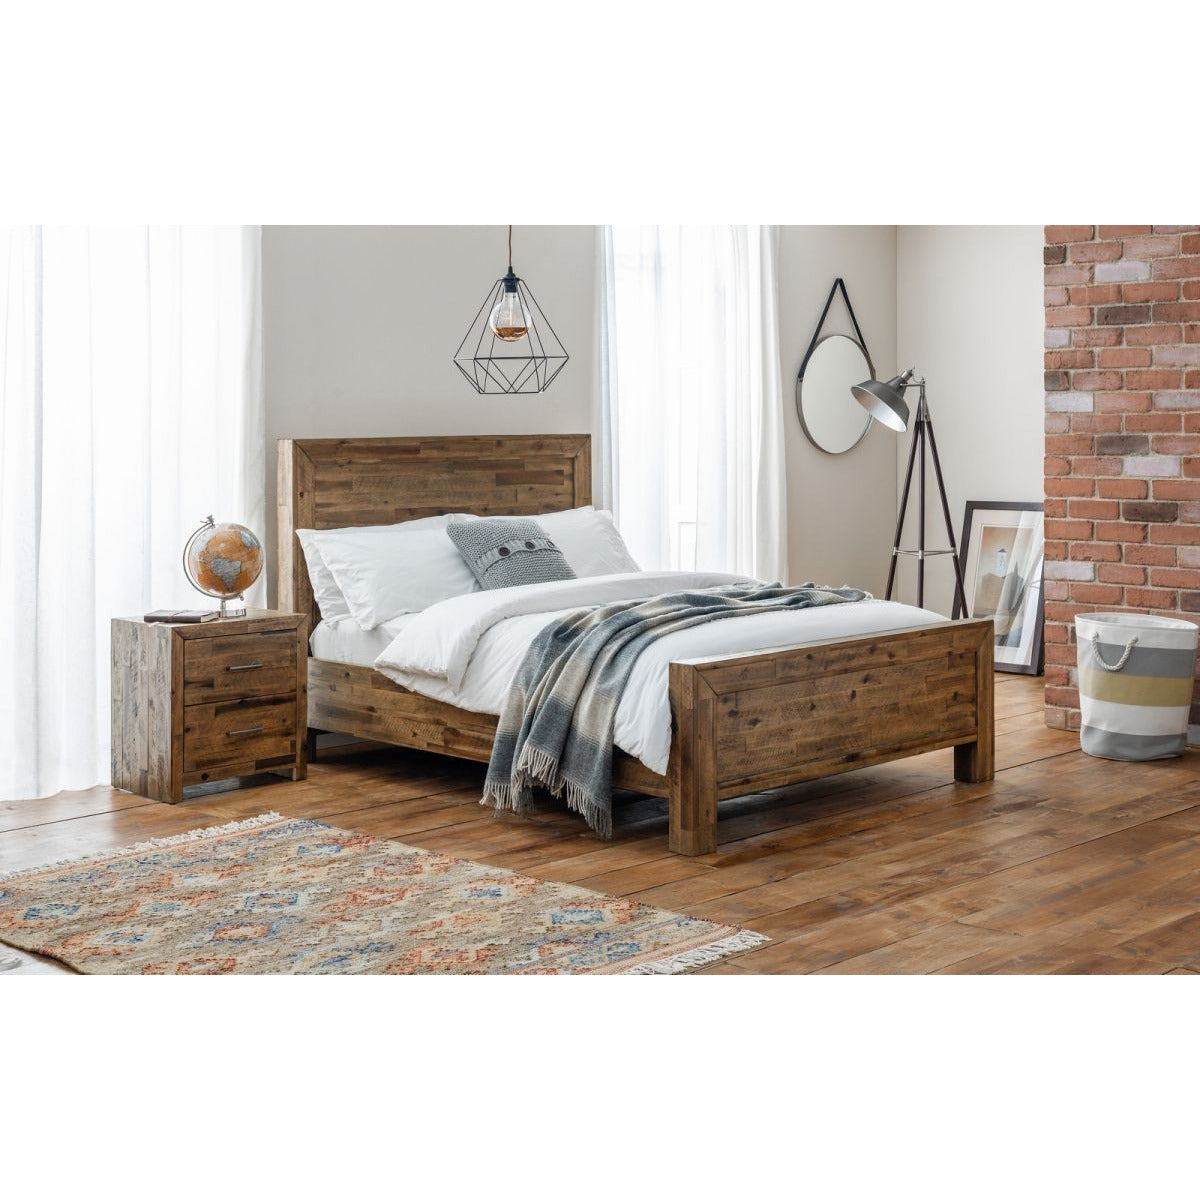 HOXTON BED SOLID HARDWOOD BED